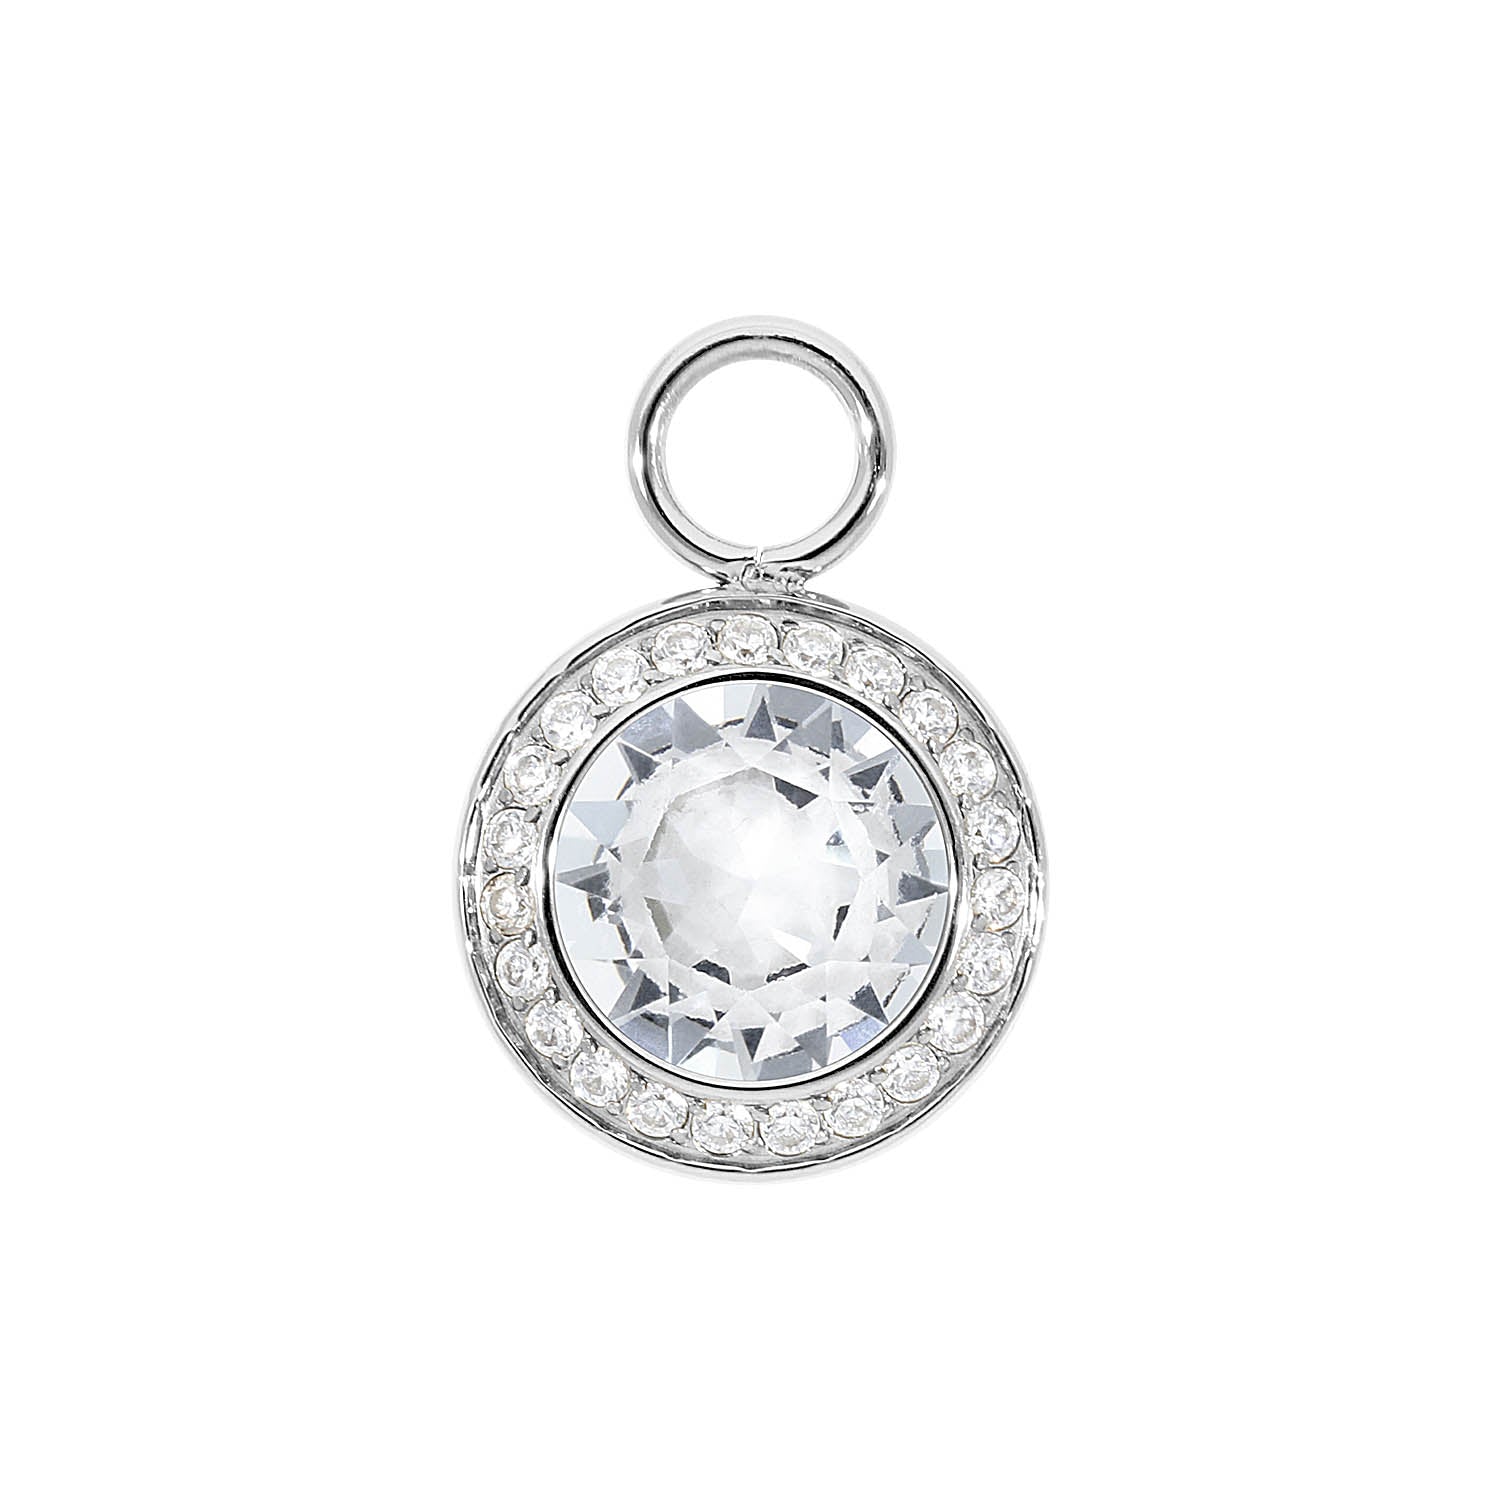 Tondo Deluxe Charm 13 mm - Silber